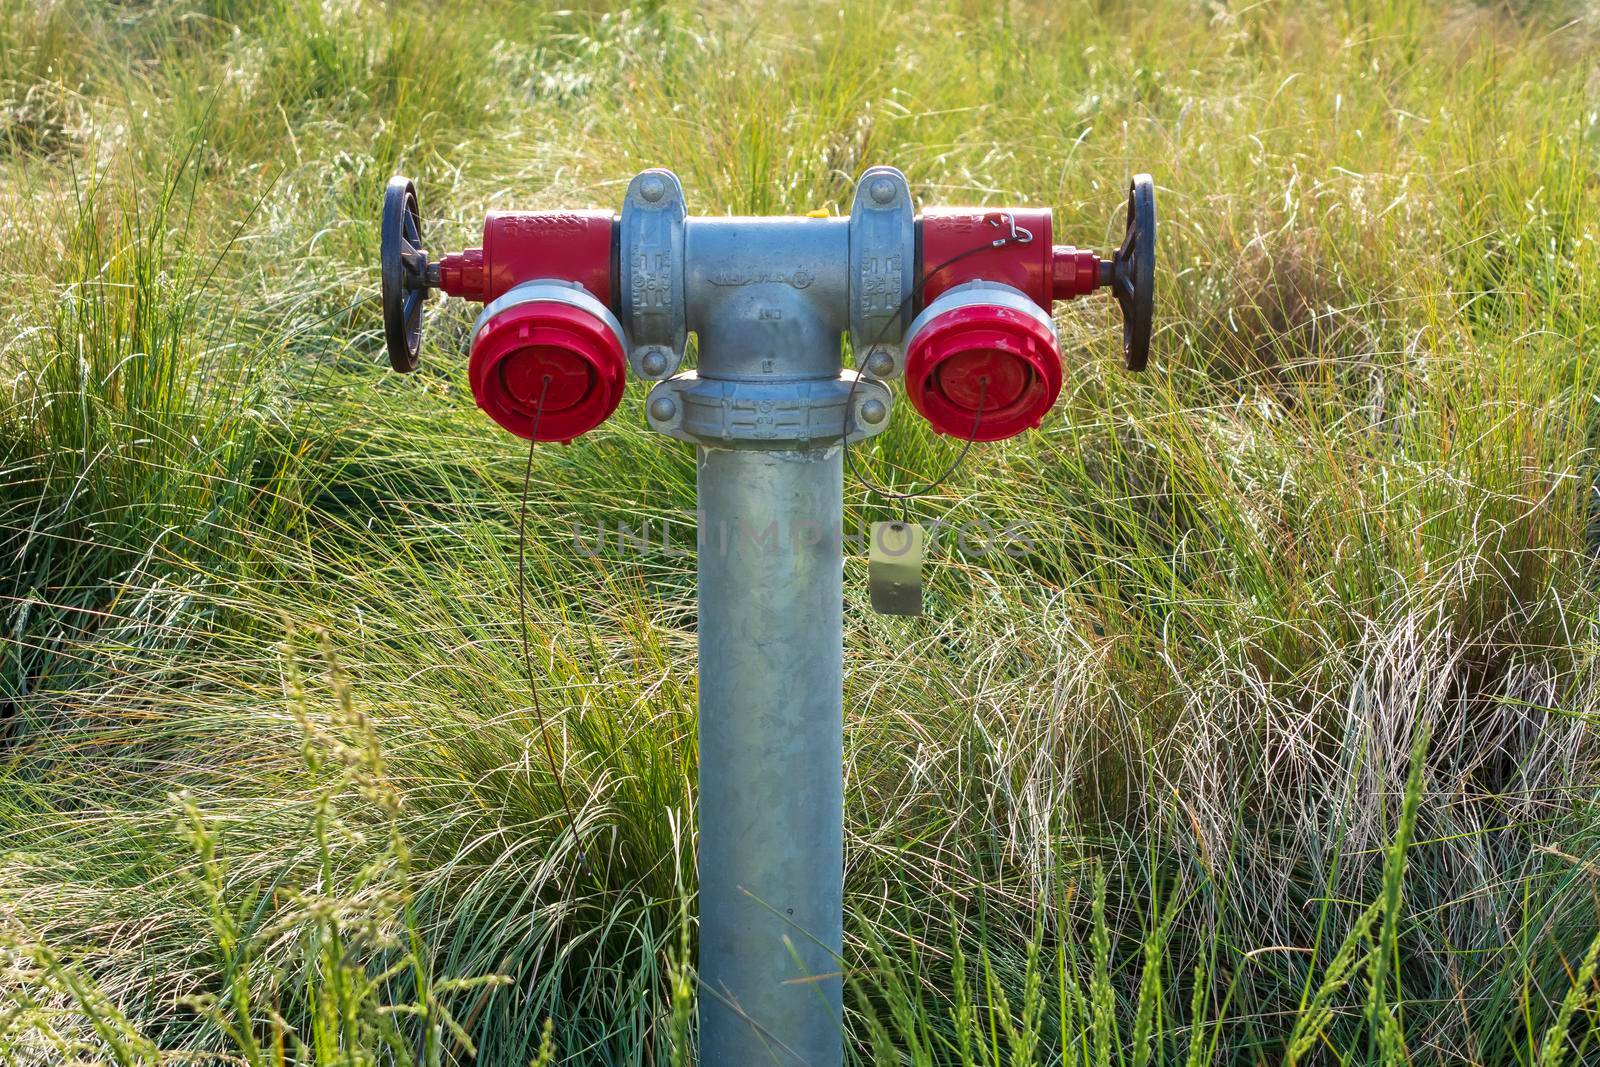 An industrial fire hydrant outdoors amongst grass and weeds in regional Australia